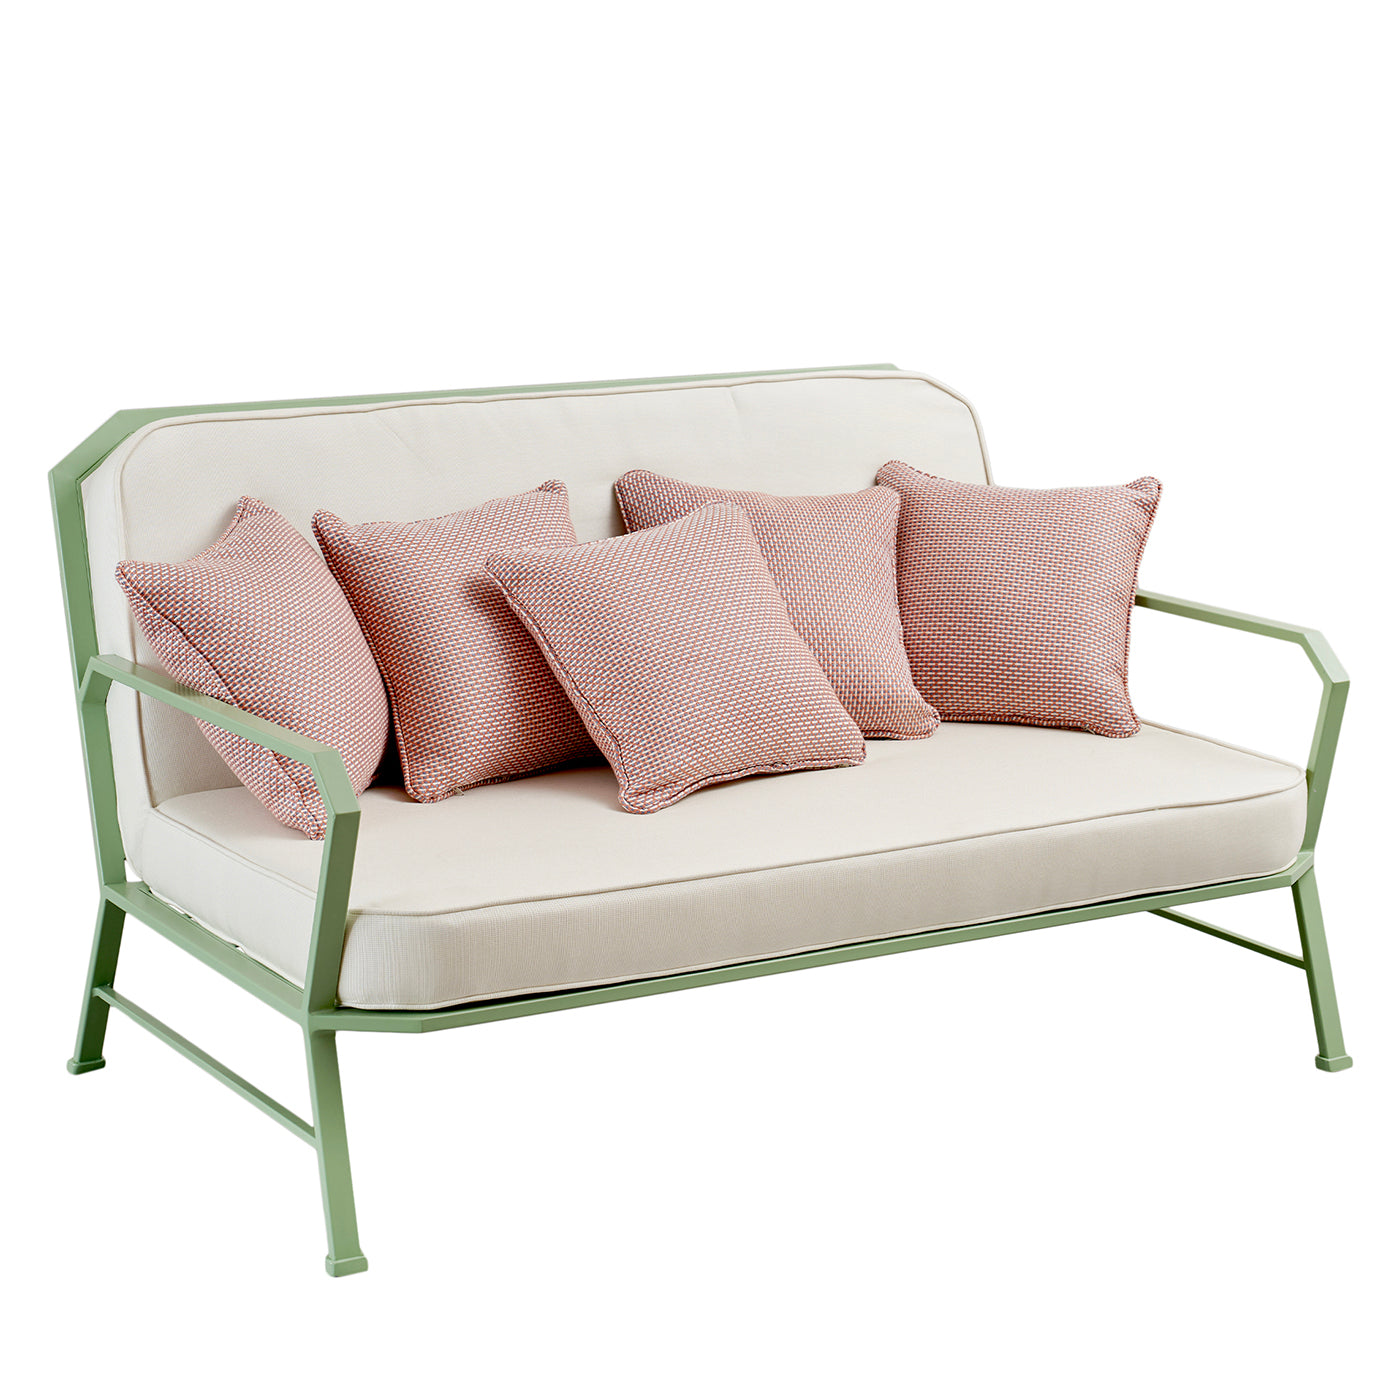 Forest Green and White Sofa by Officina Ciani in Stainless Steel - Main view